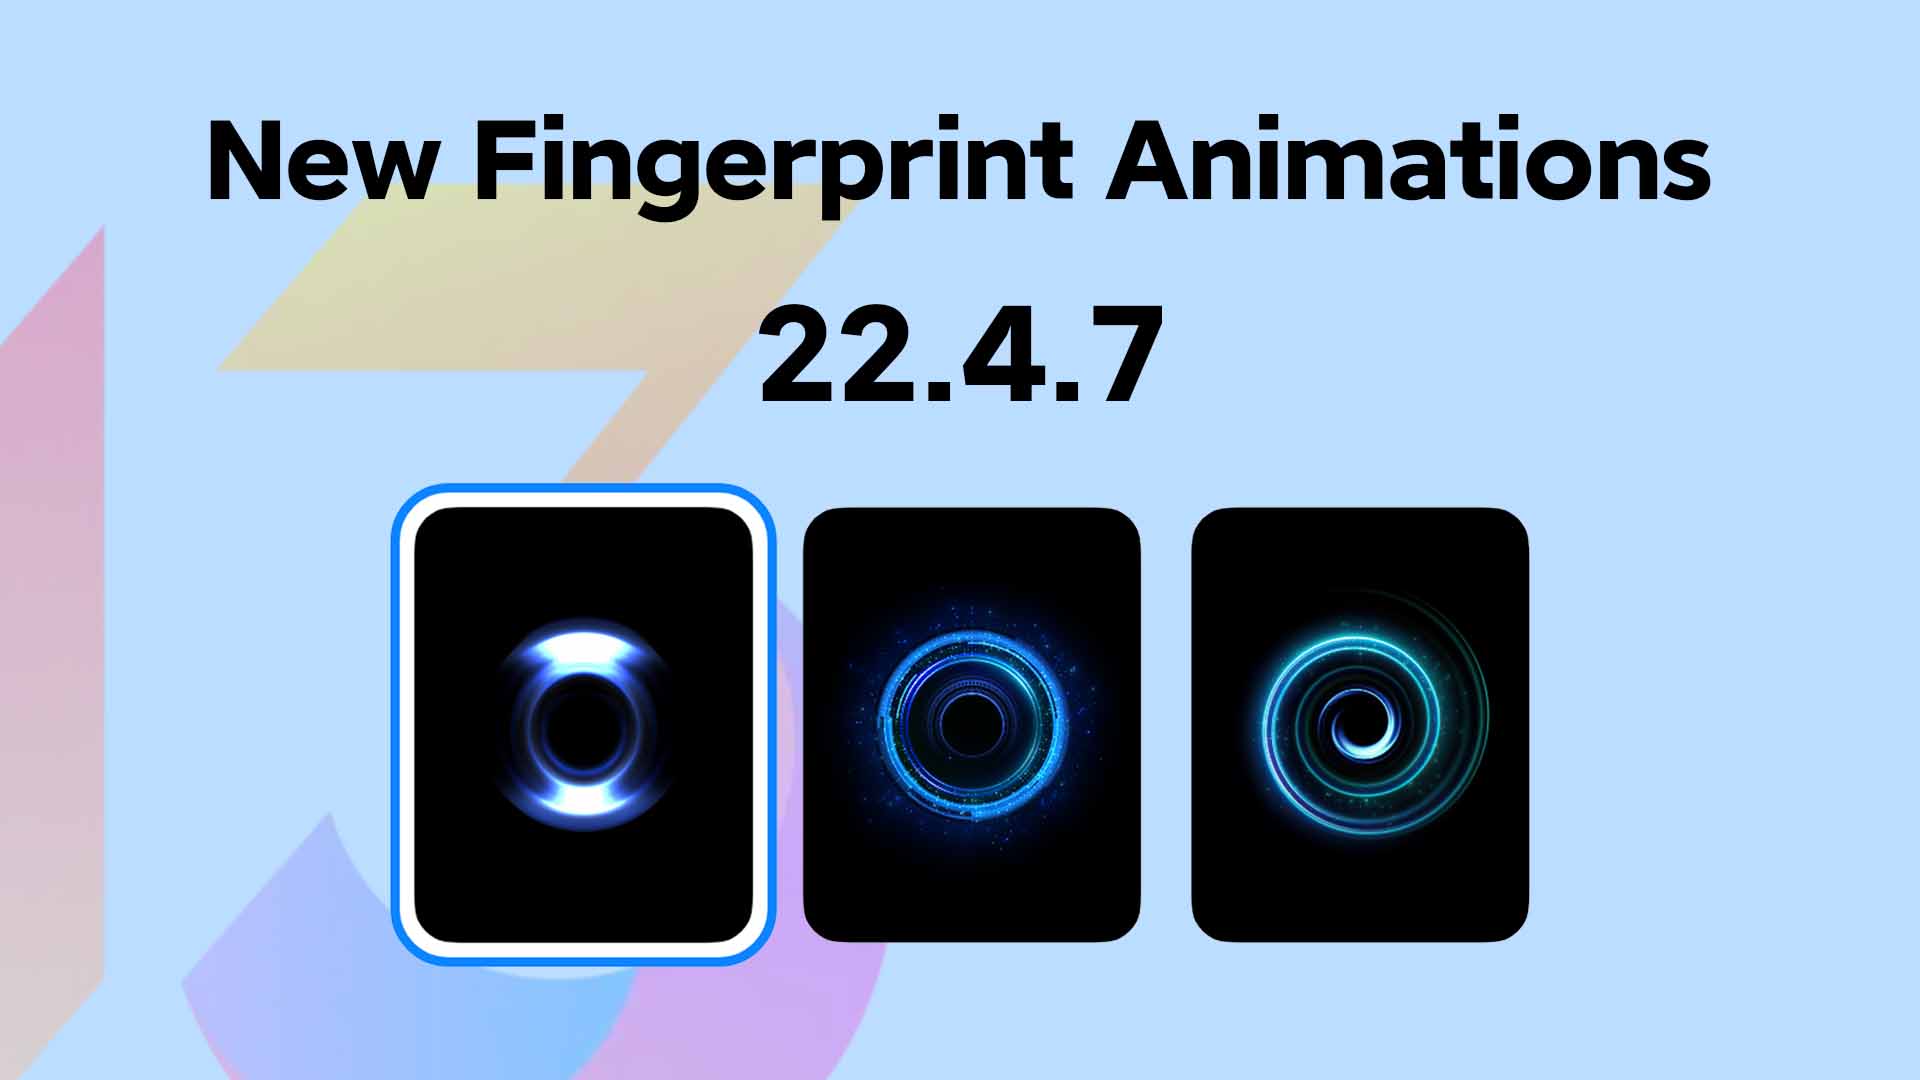 MIUI 13 Beta  Update brings new Fingerprint Animation for Xiaomi  Devices - xiaomiui